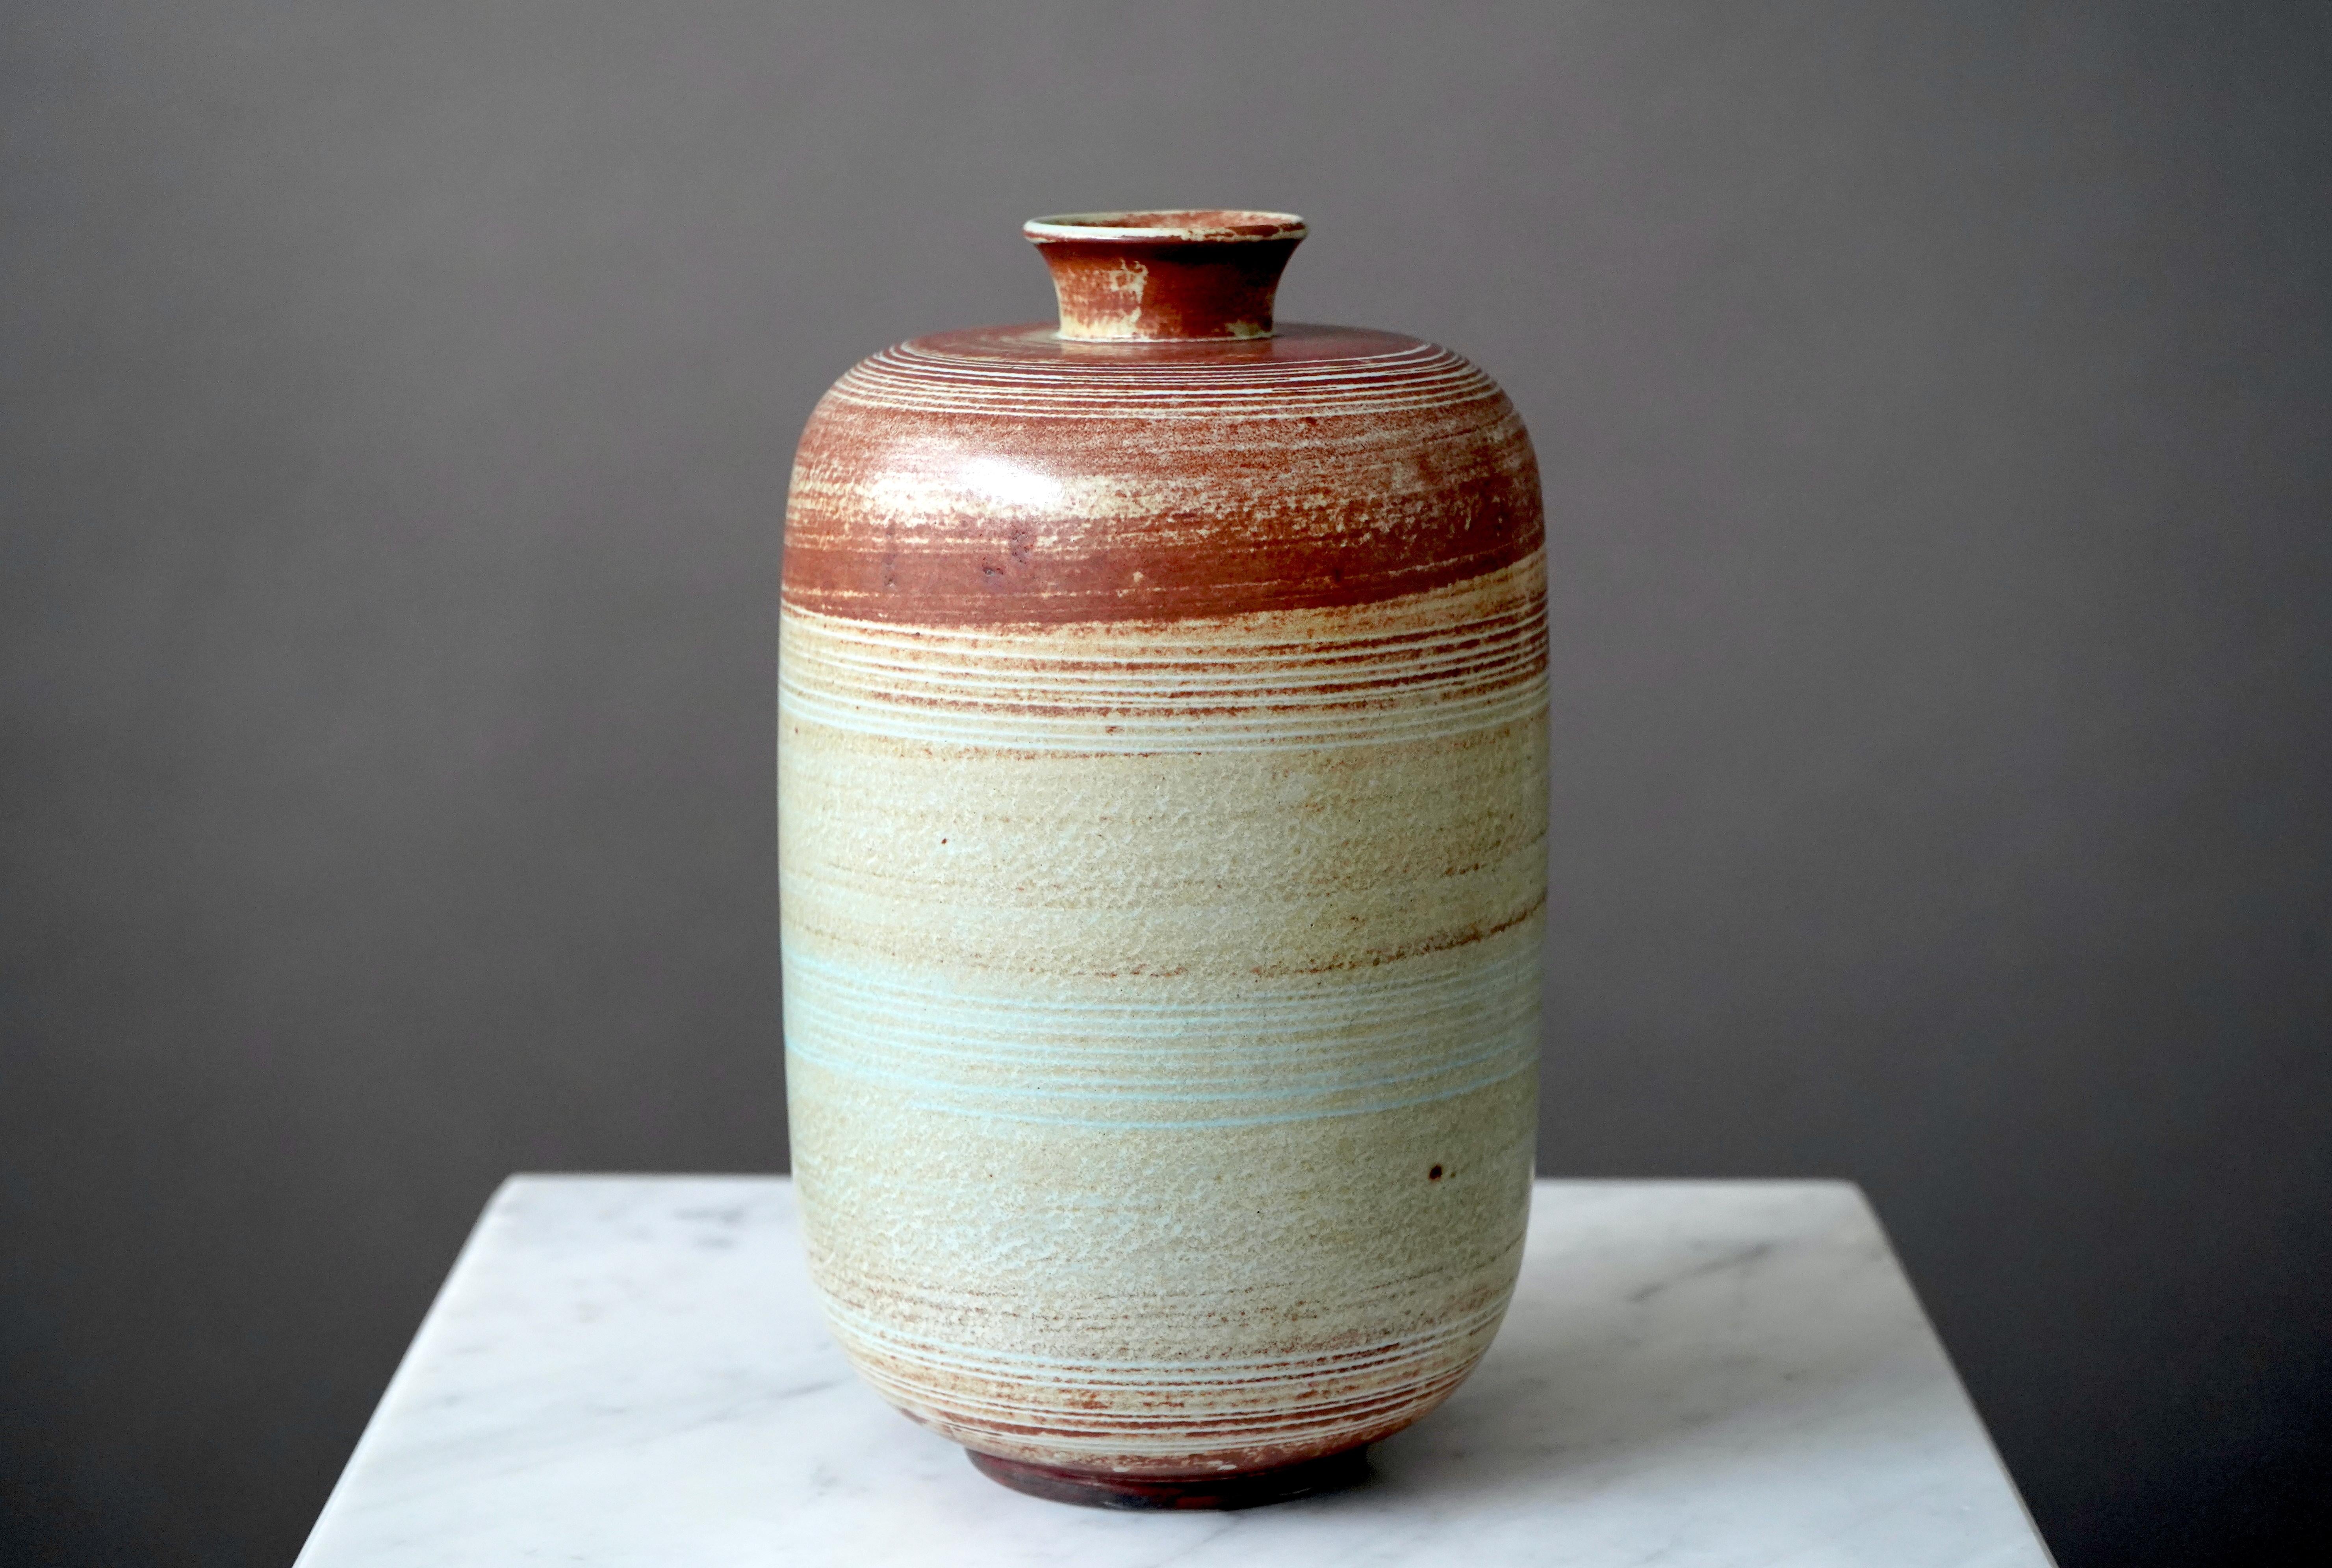 Beautiful and rare stoneware vase designed by Gertrud Lönegren.
This studio piece was created at Rorstrand in Sweden between 1936-41.

Excellent condition. Impressed 'Rörstrand / Lönegren / SWEDEN / L 300 / HANDDREJAD'.

Gertrud Lönegren was a